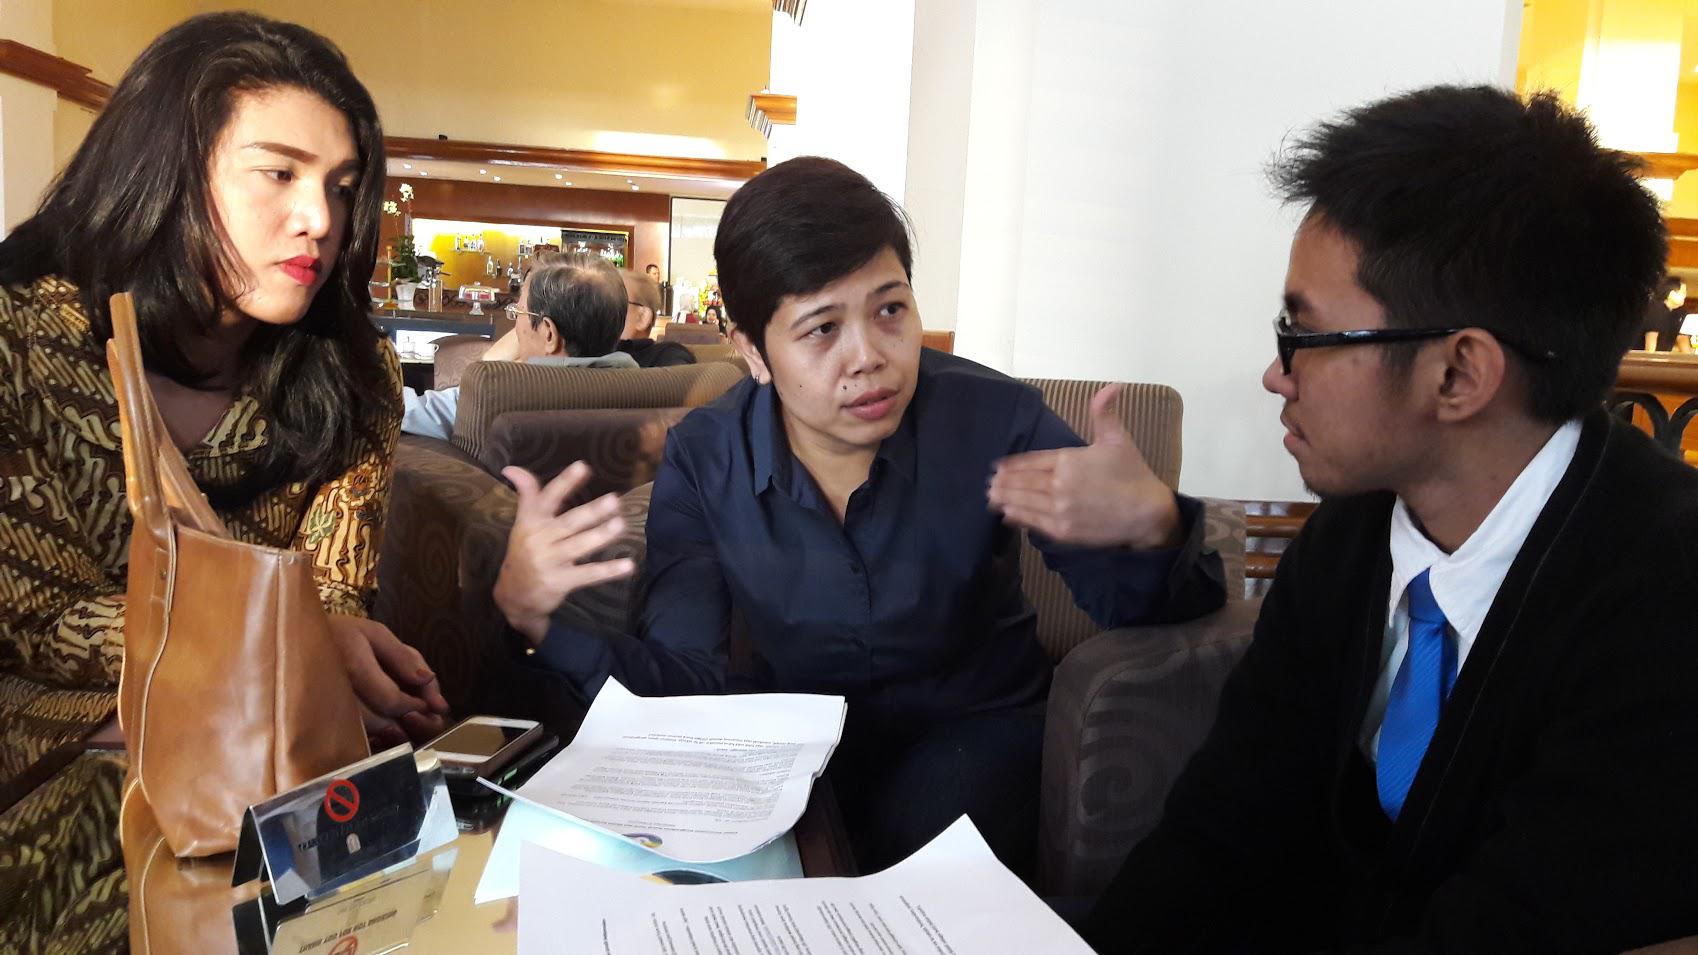 Kanza Vina (left), a transgender woman, talks with Abhipraya Ardiansyah (far right), a transgender man, and Yuli Rustinawati (center), their colleague from Forum LGBTIQ Indonesia. Vina and Abhipraya received awards from an independent journalism union.